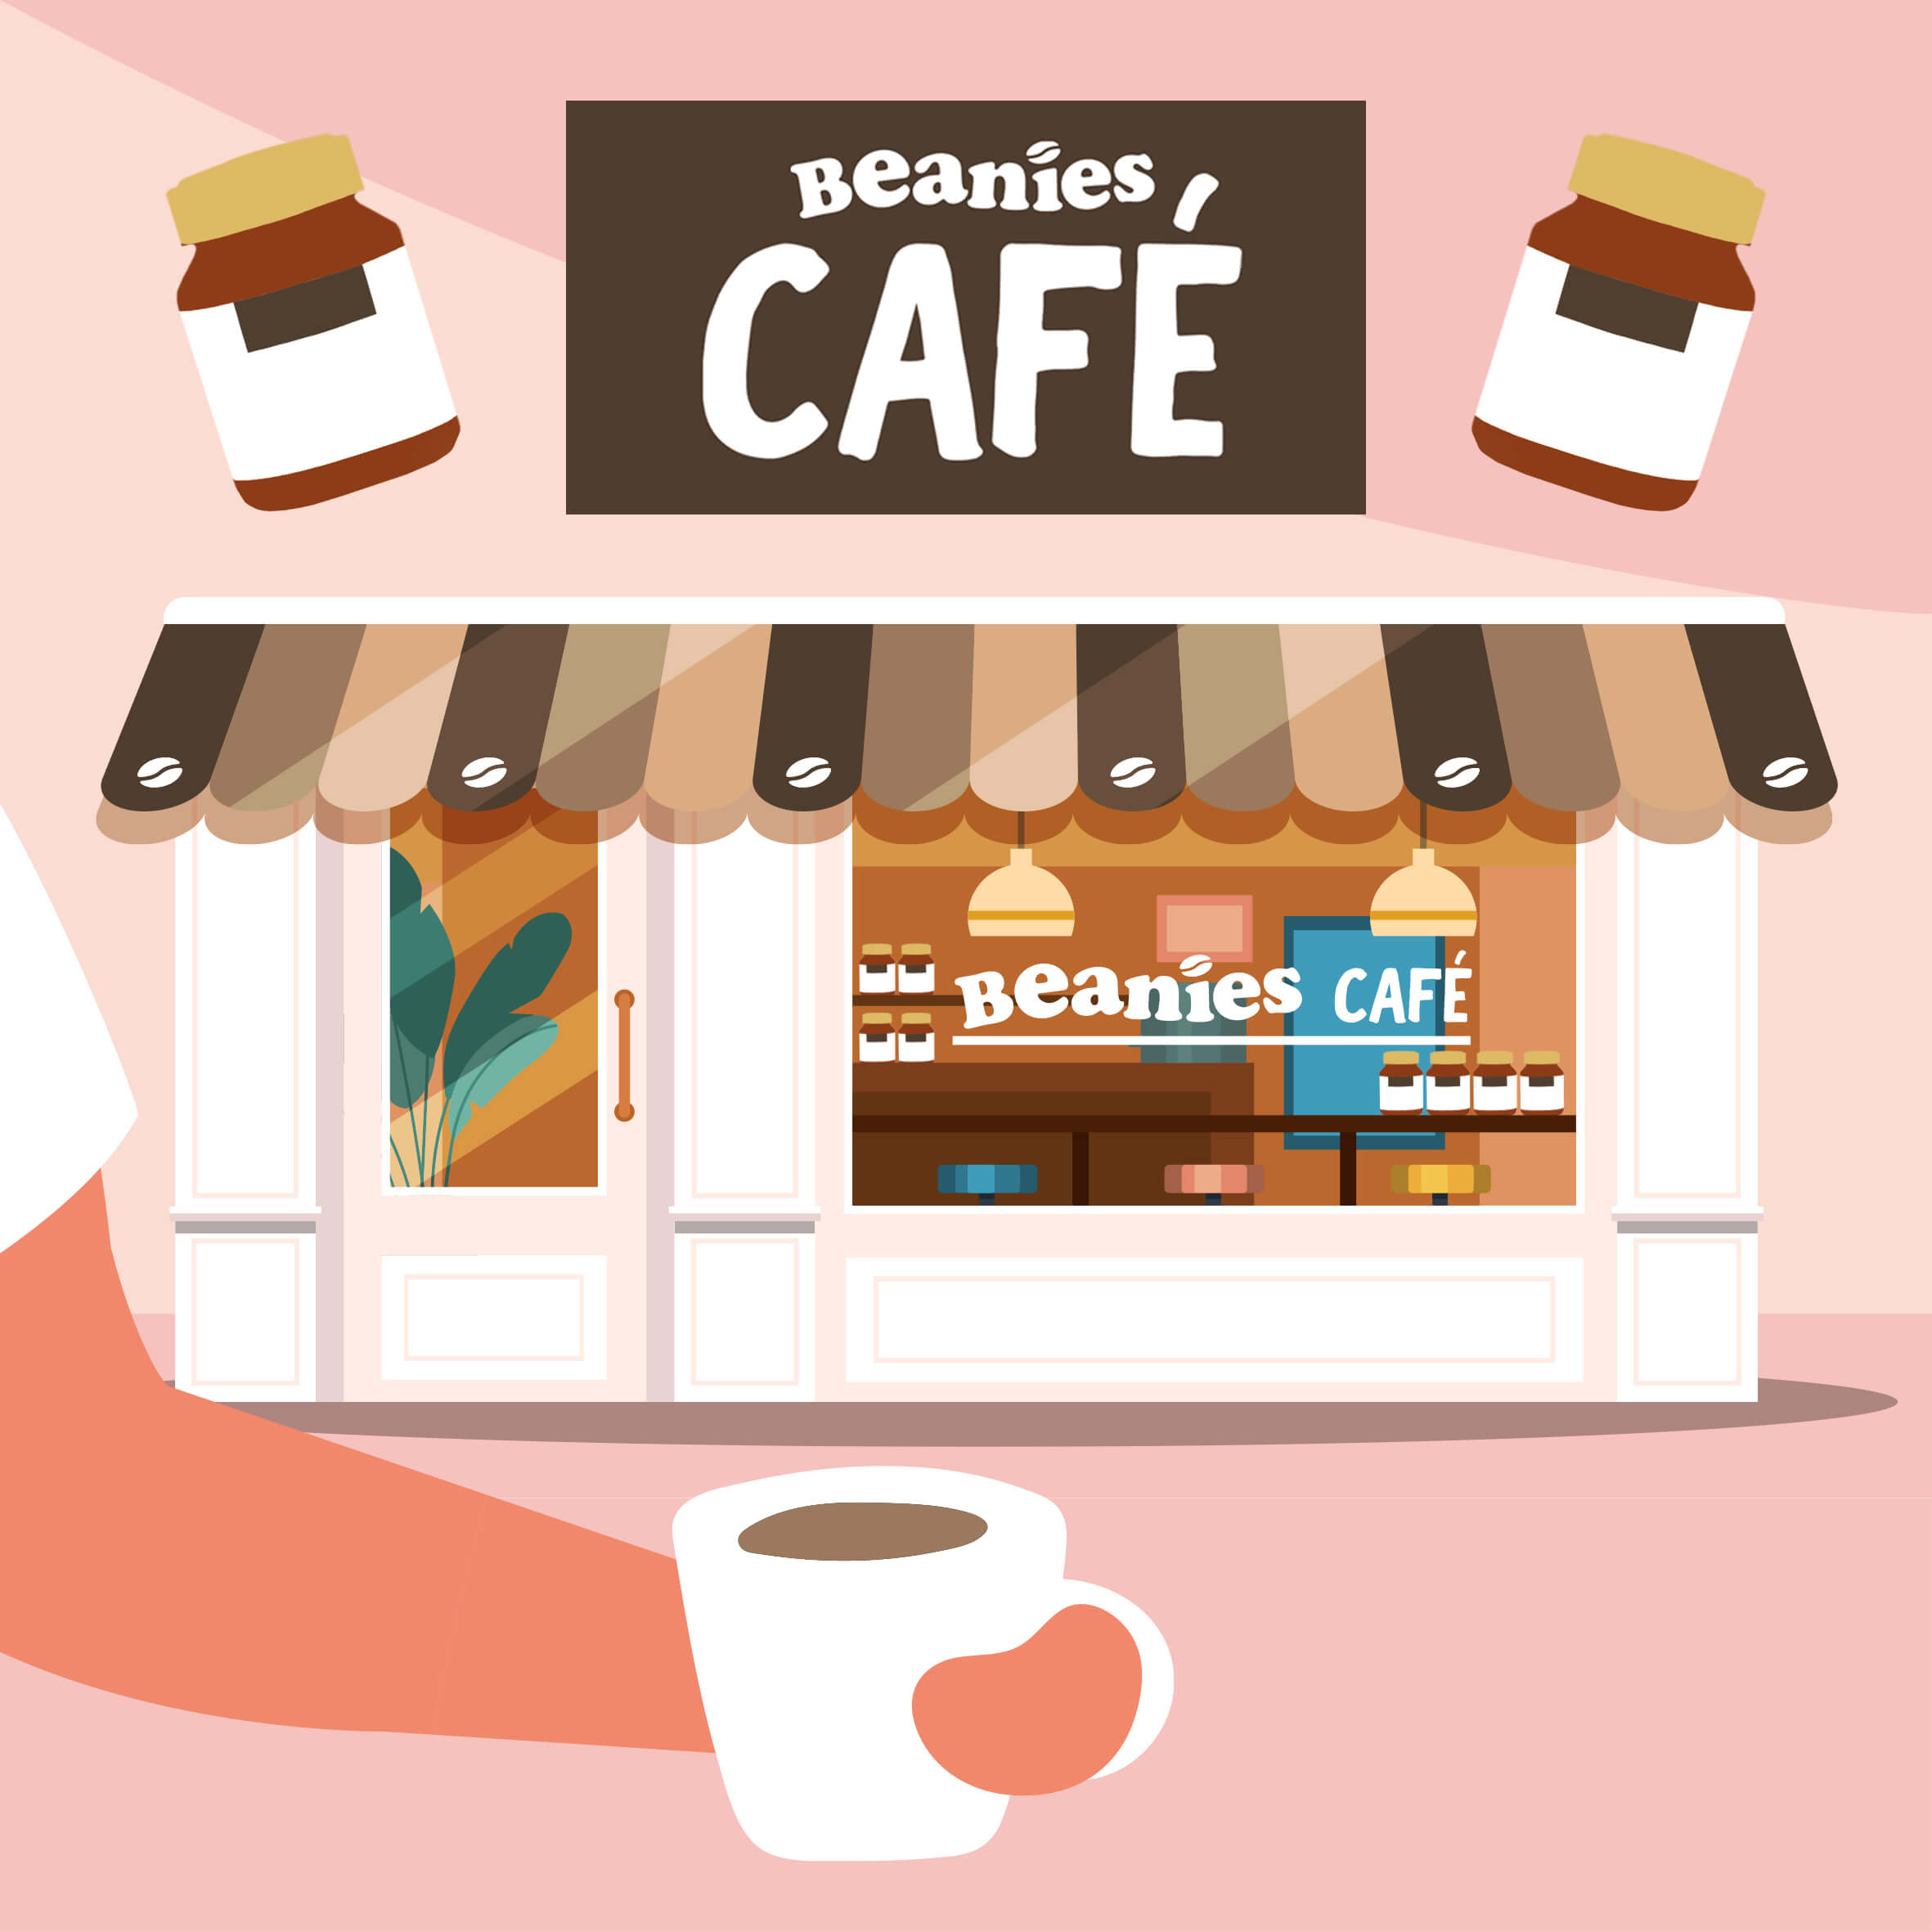 Welcome to Beanies Café, how can we help you?